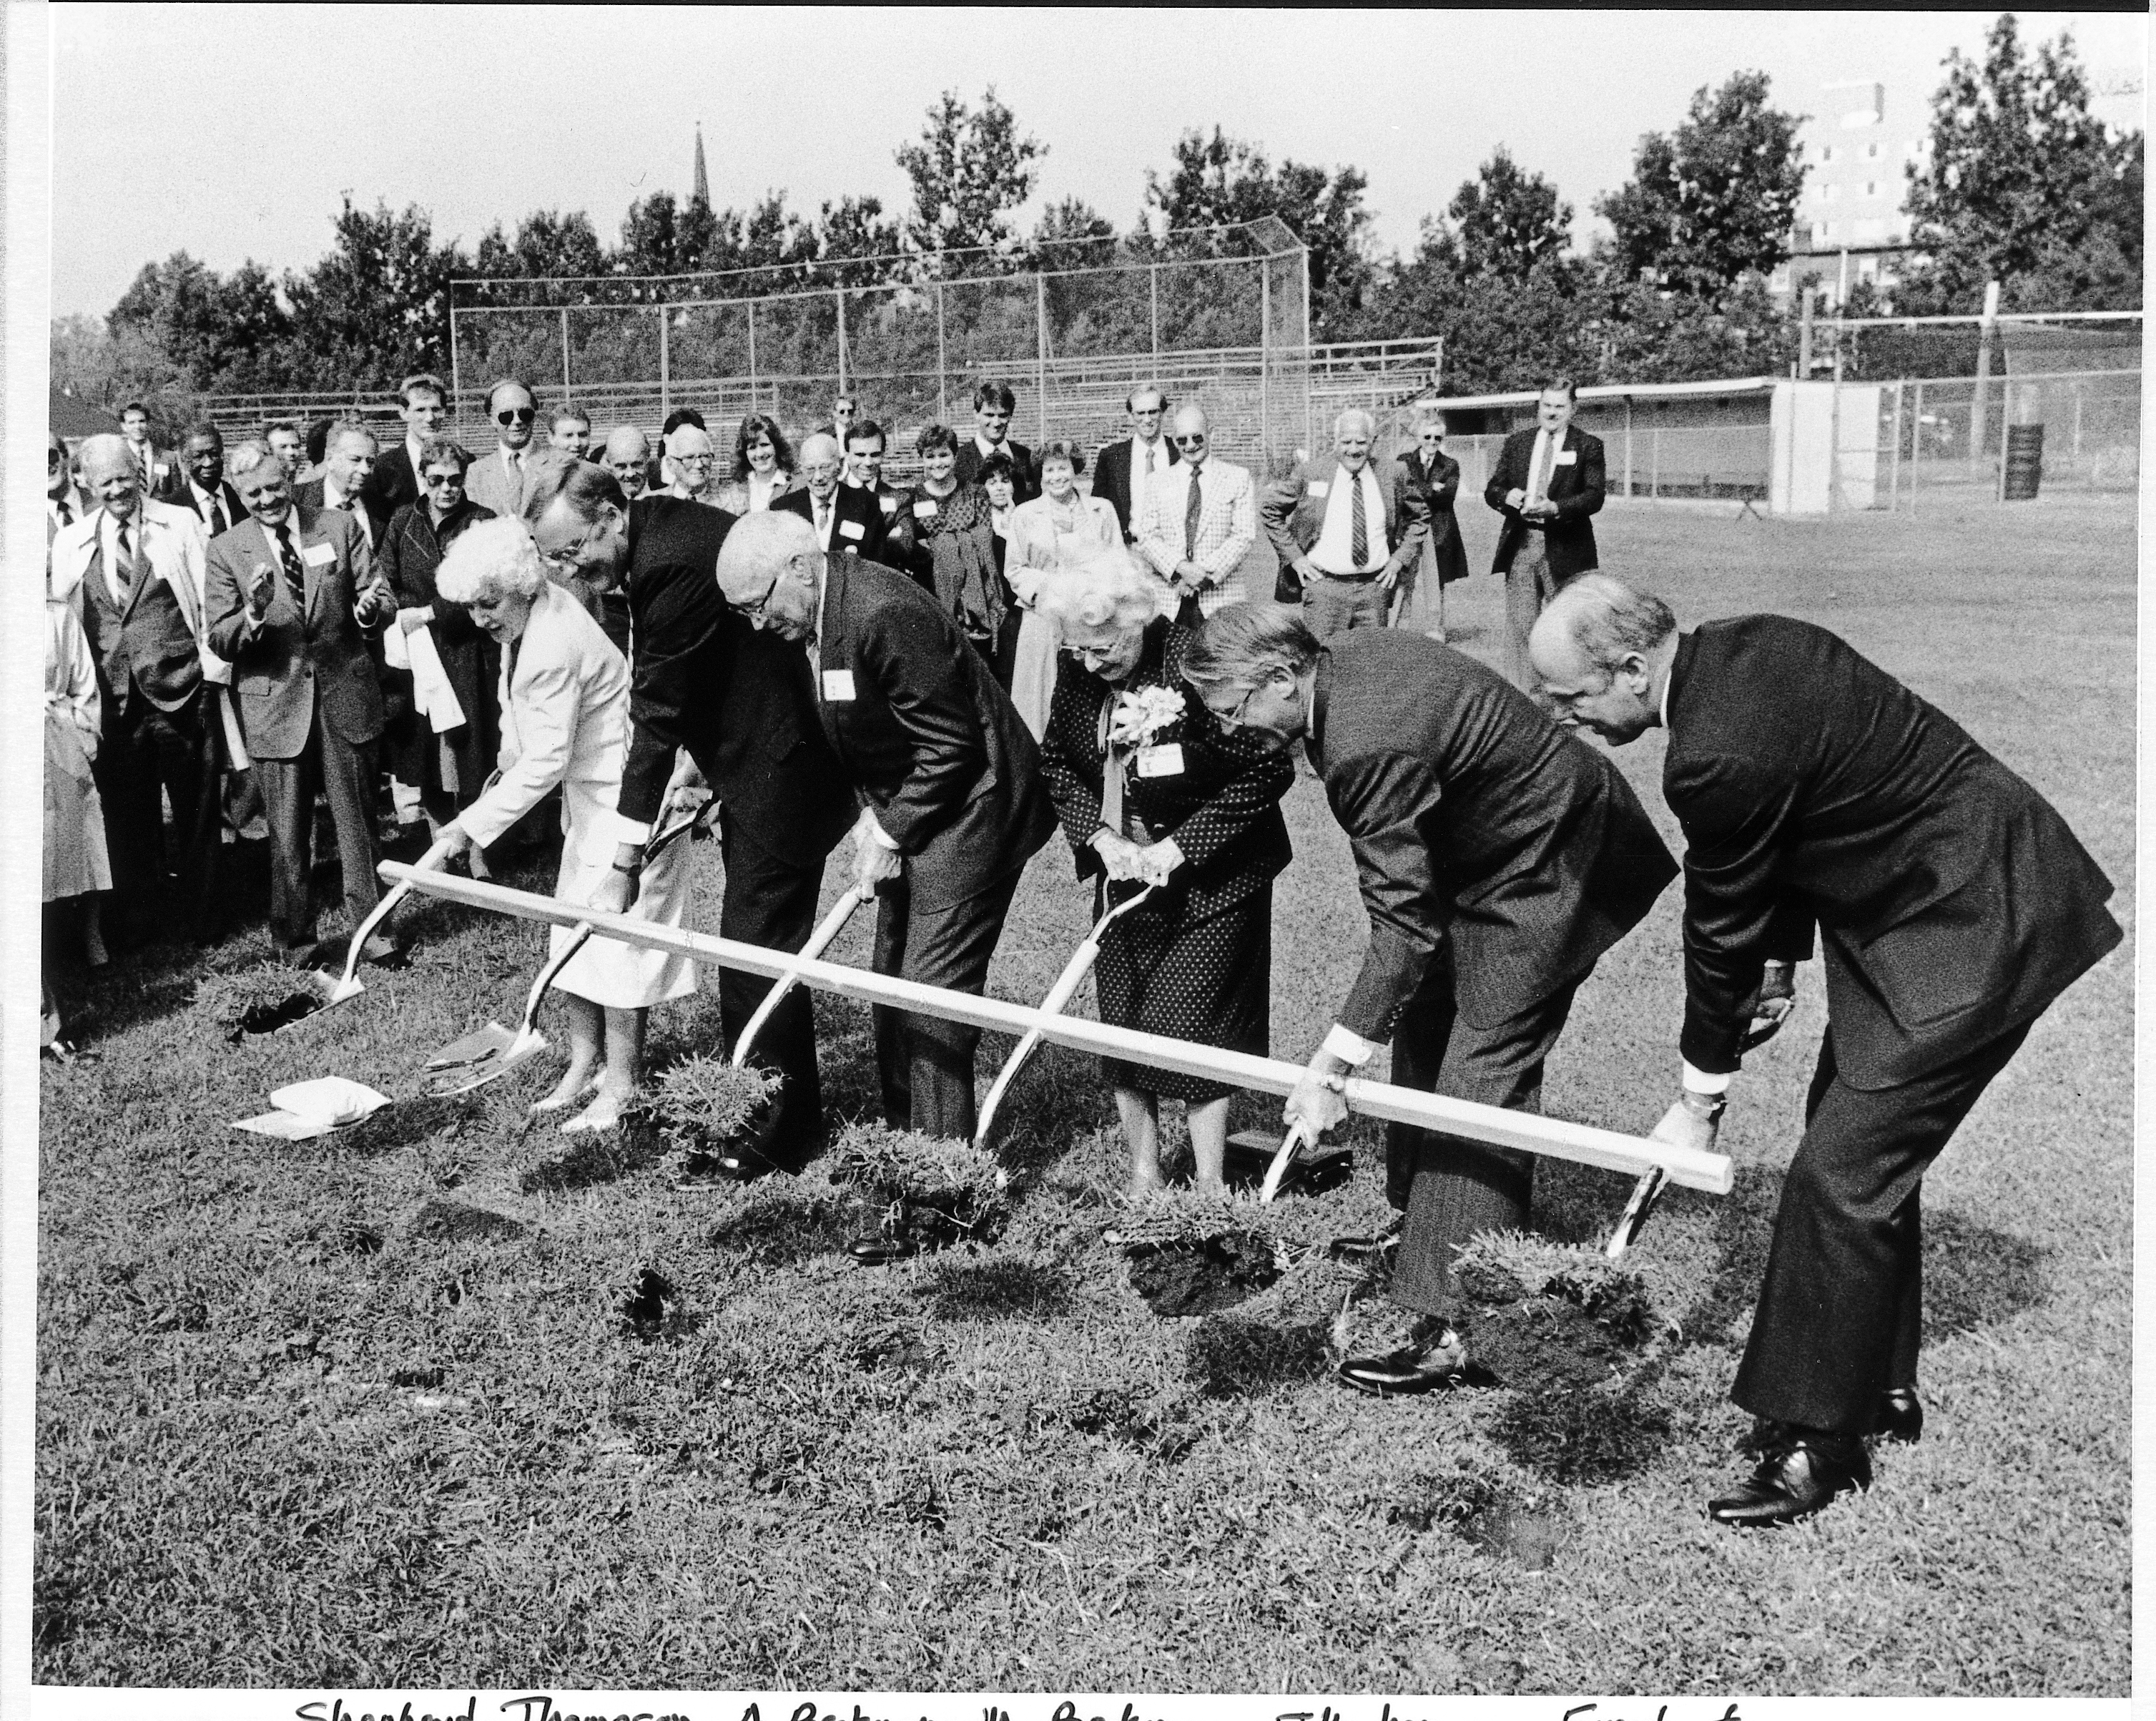 Mabel Beckman, Arnold Beckman, and others shovel a ceremonial scoop of soil at the Beckman Institute's groundbreaking ceremony.